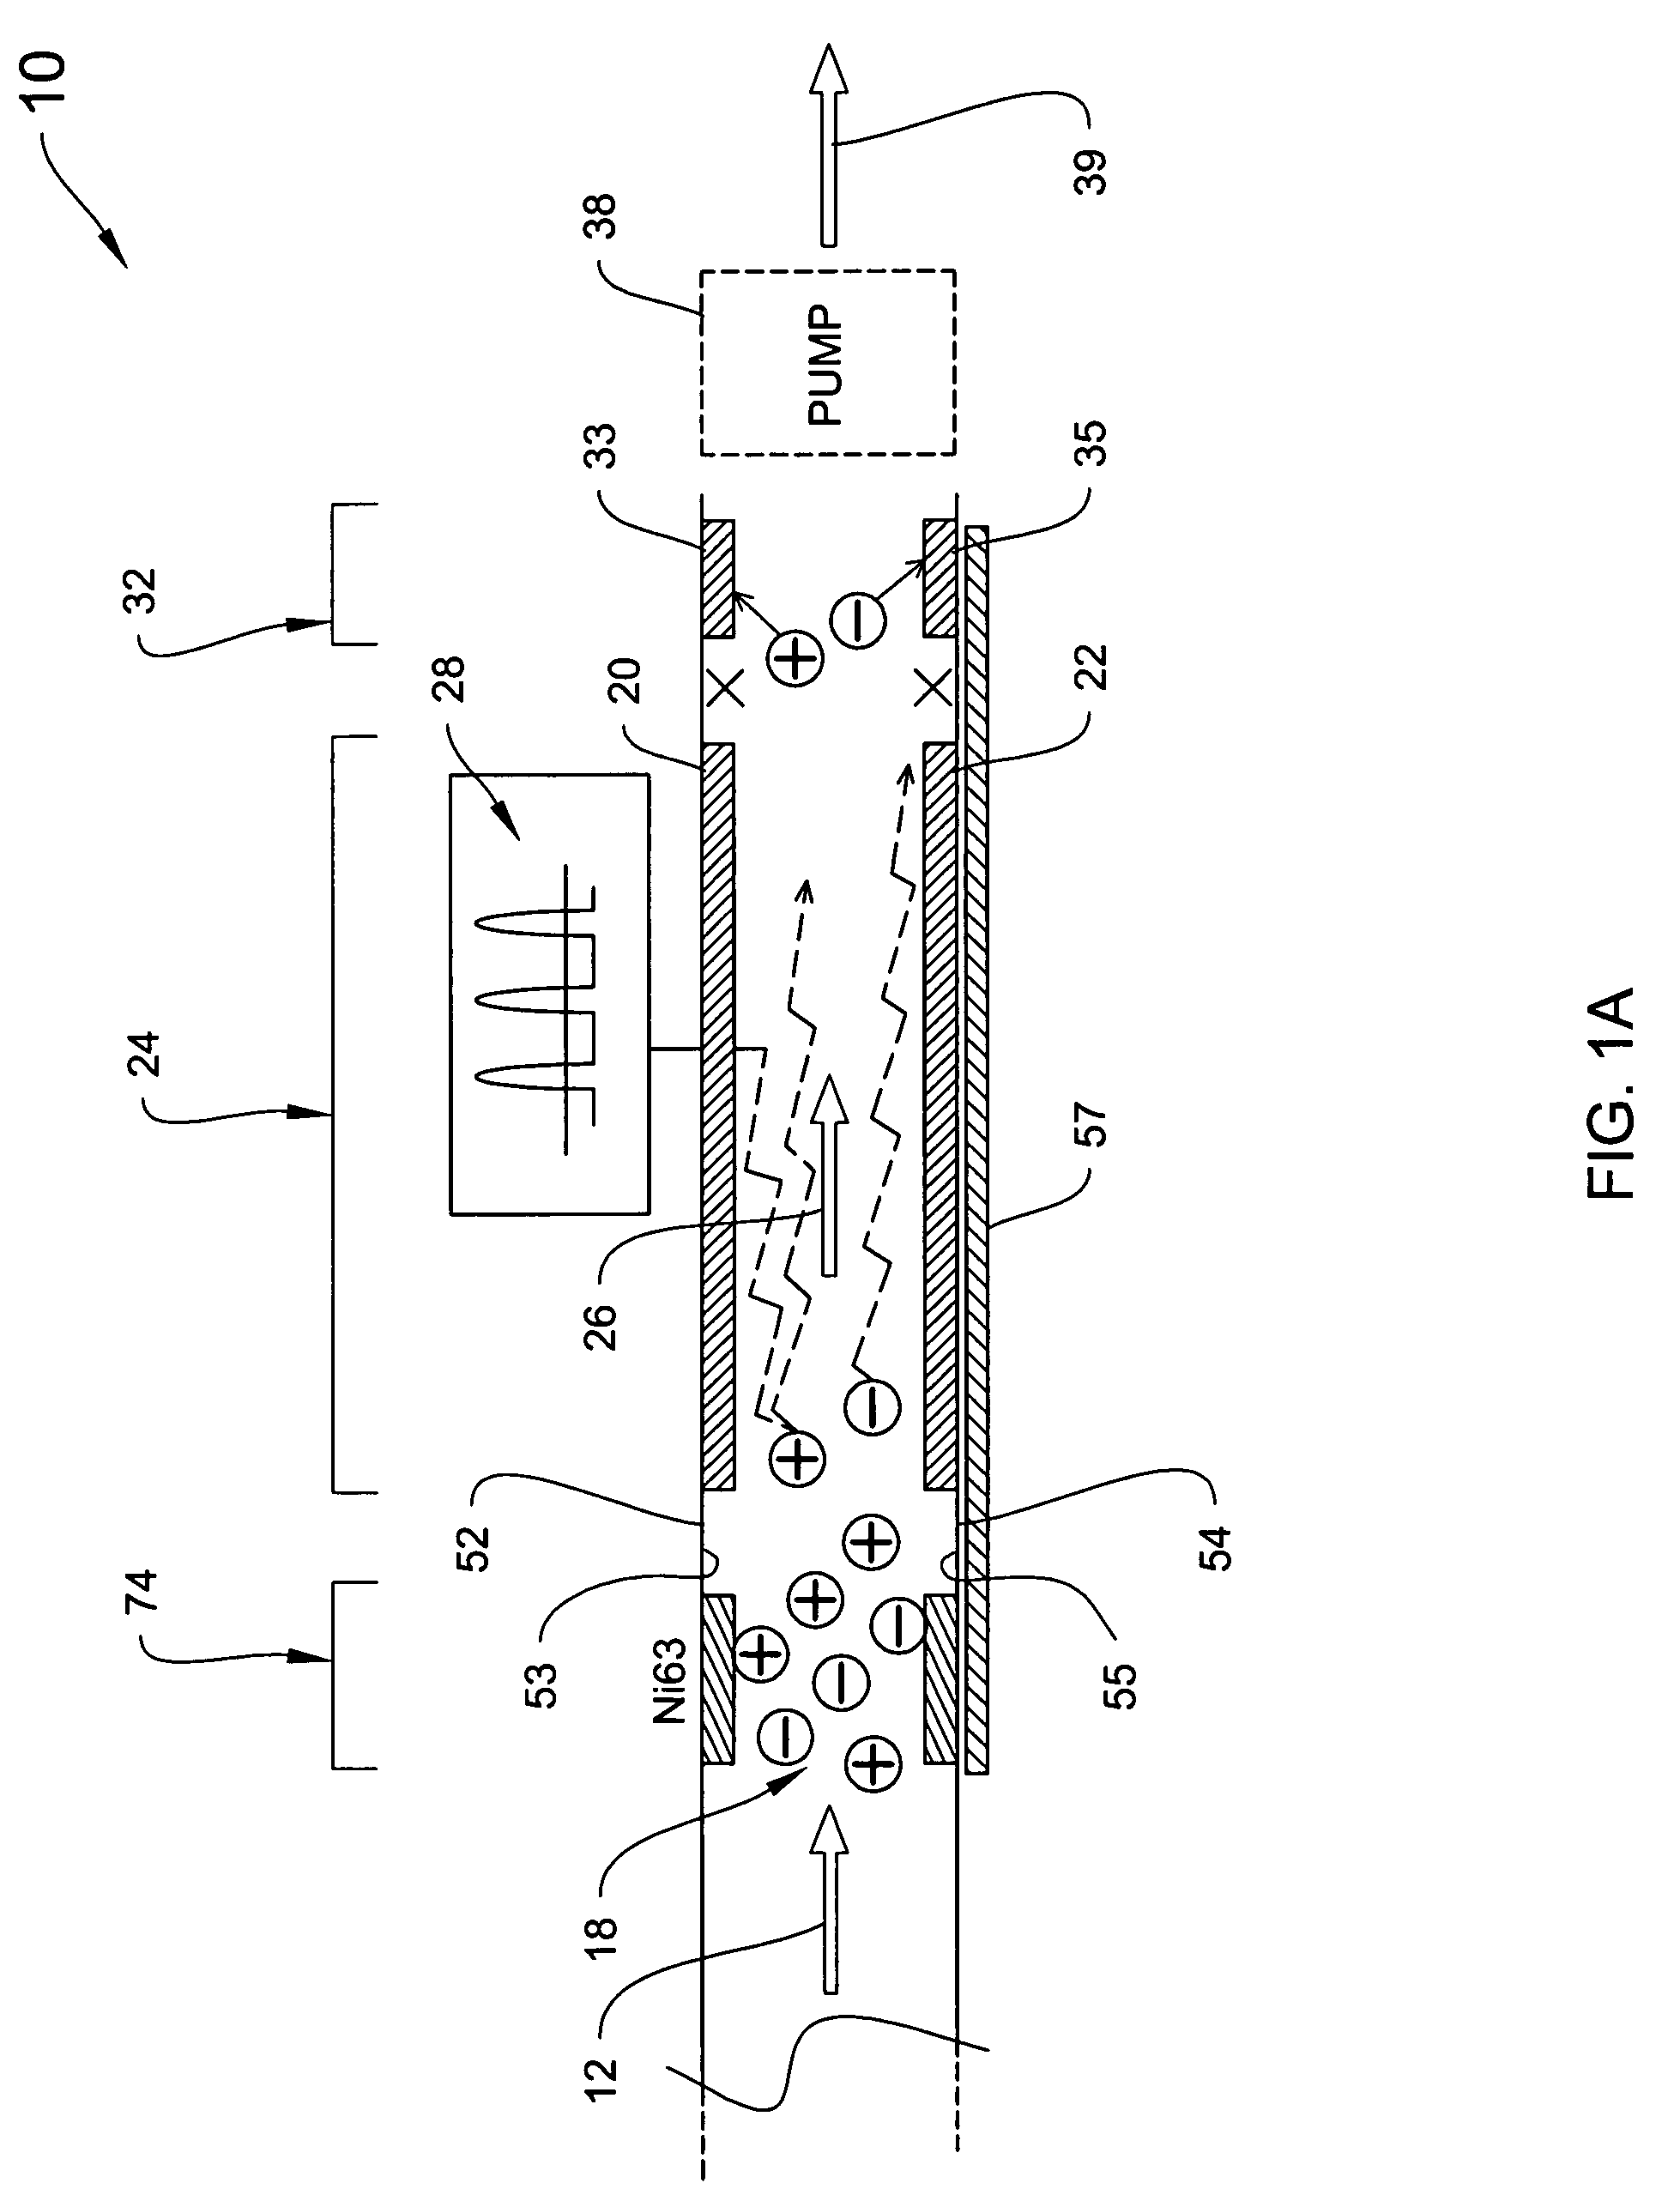 Explosives detection using differential ion mobility spectrometry